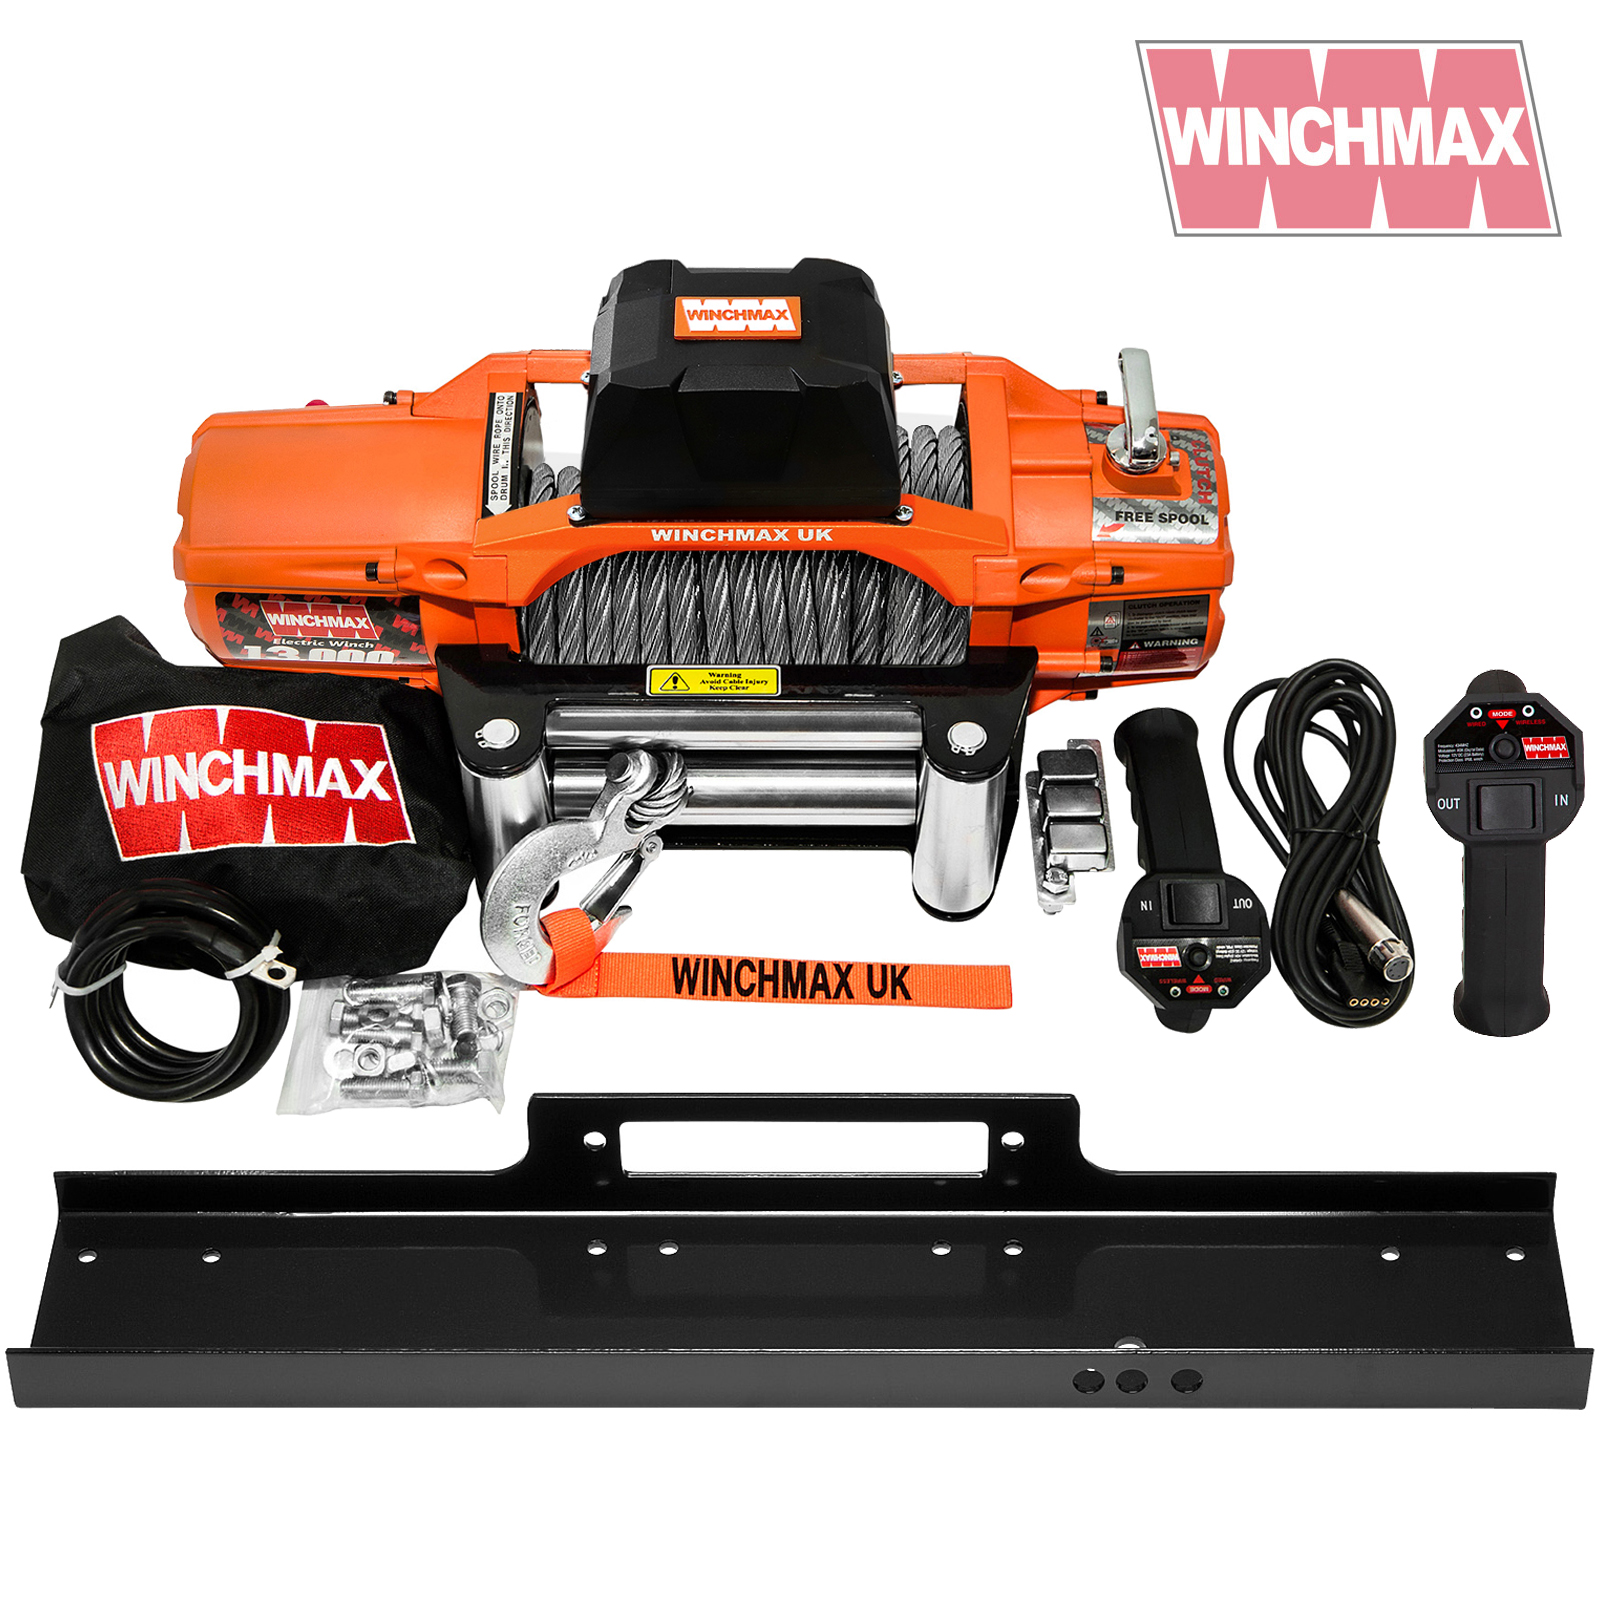 Winchmax 13500lb winch, mounting plate and remotes